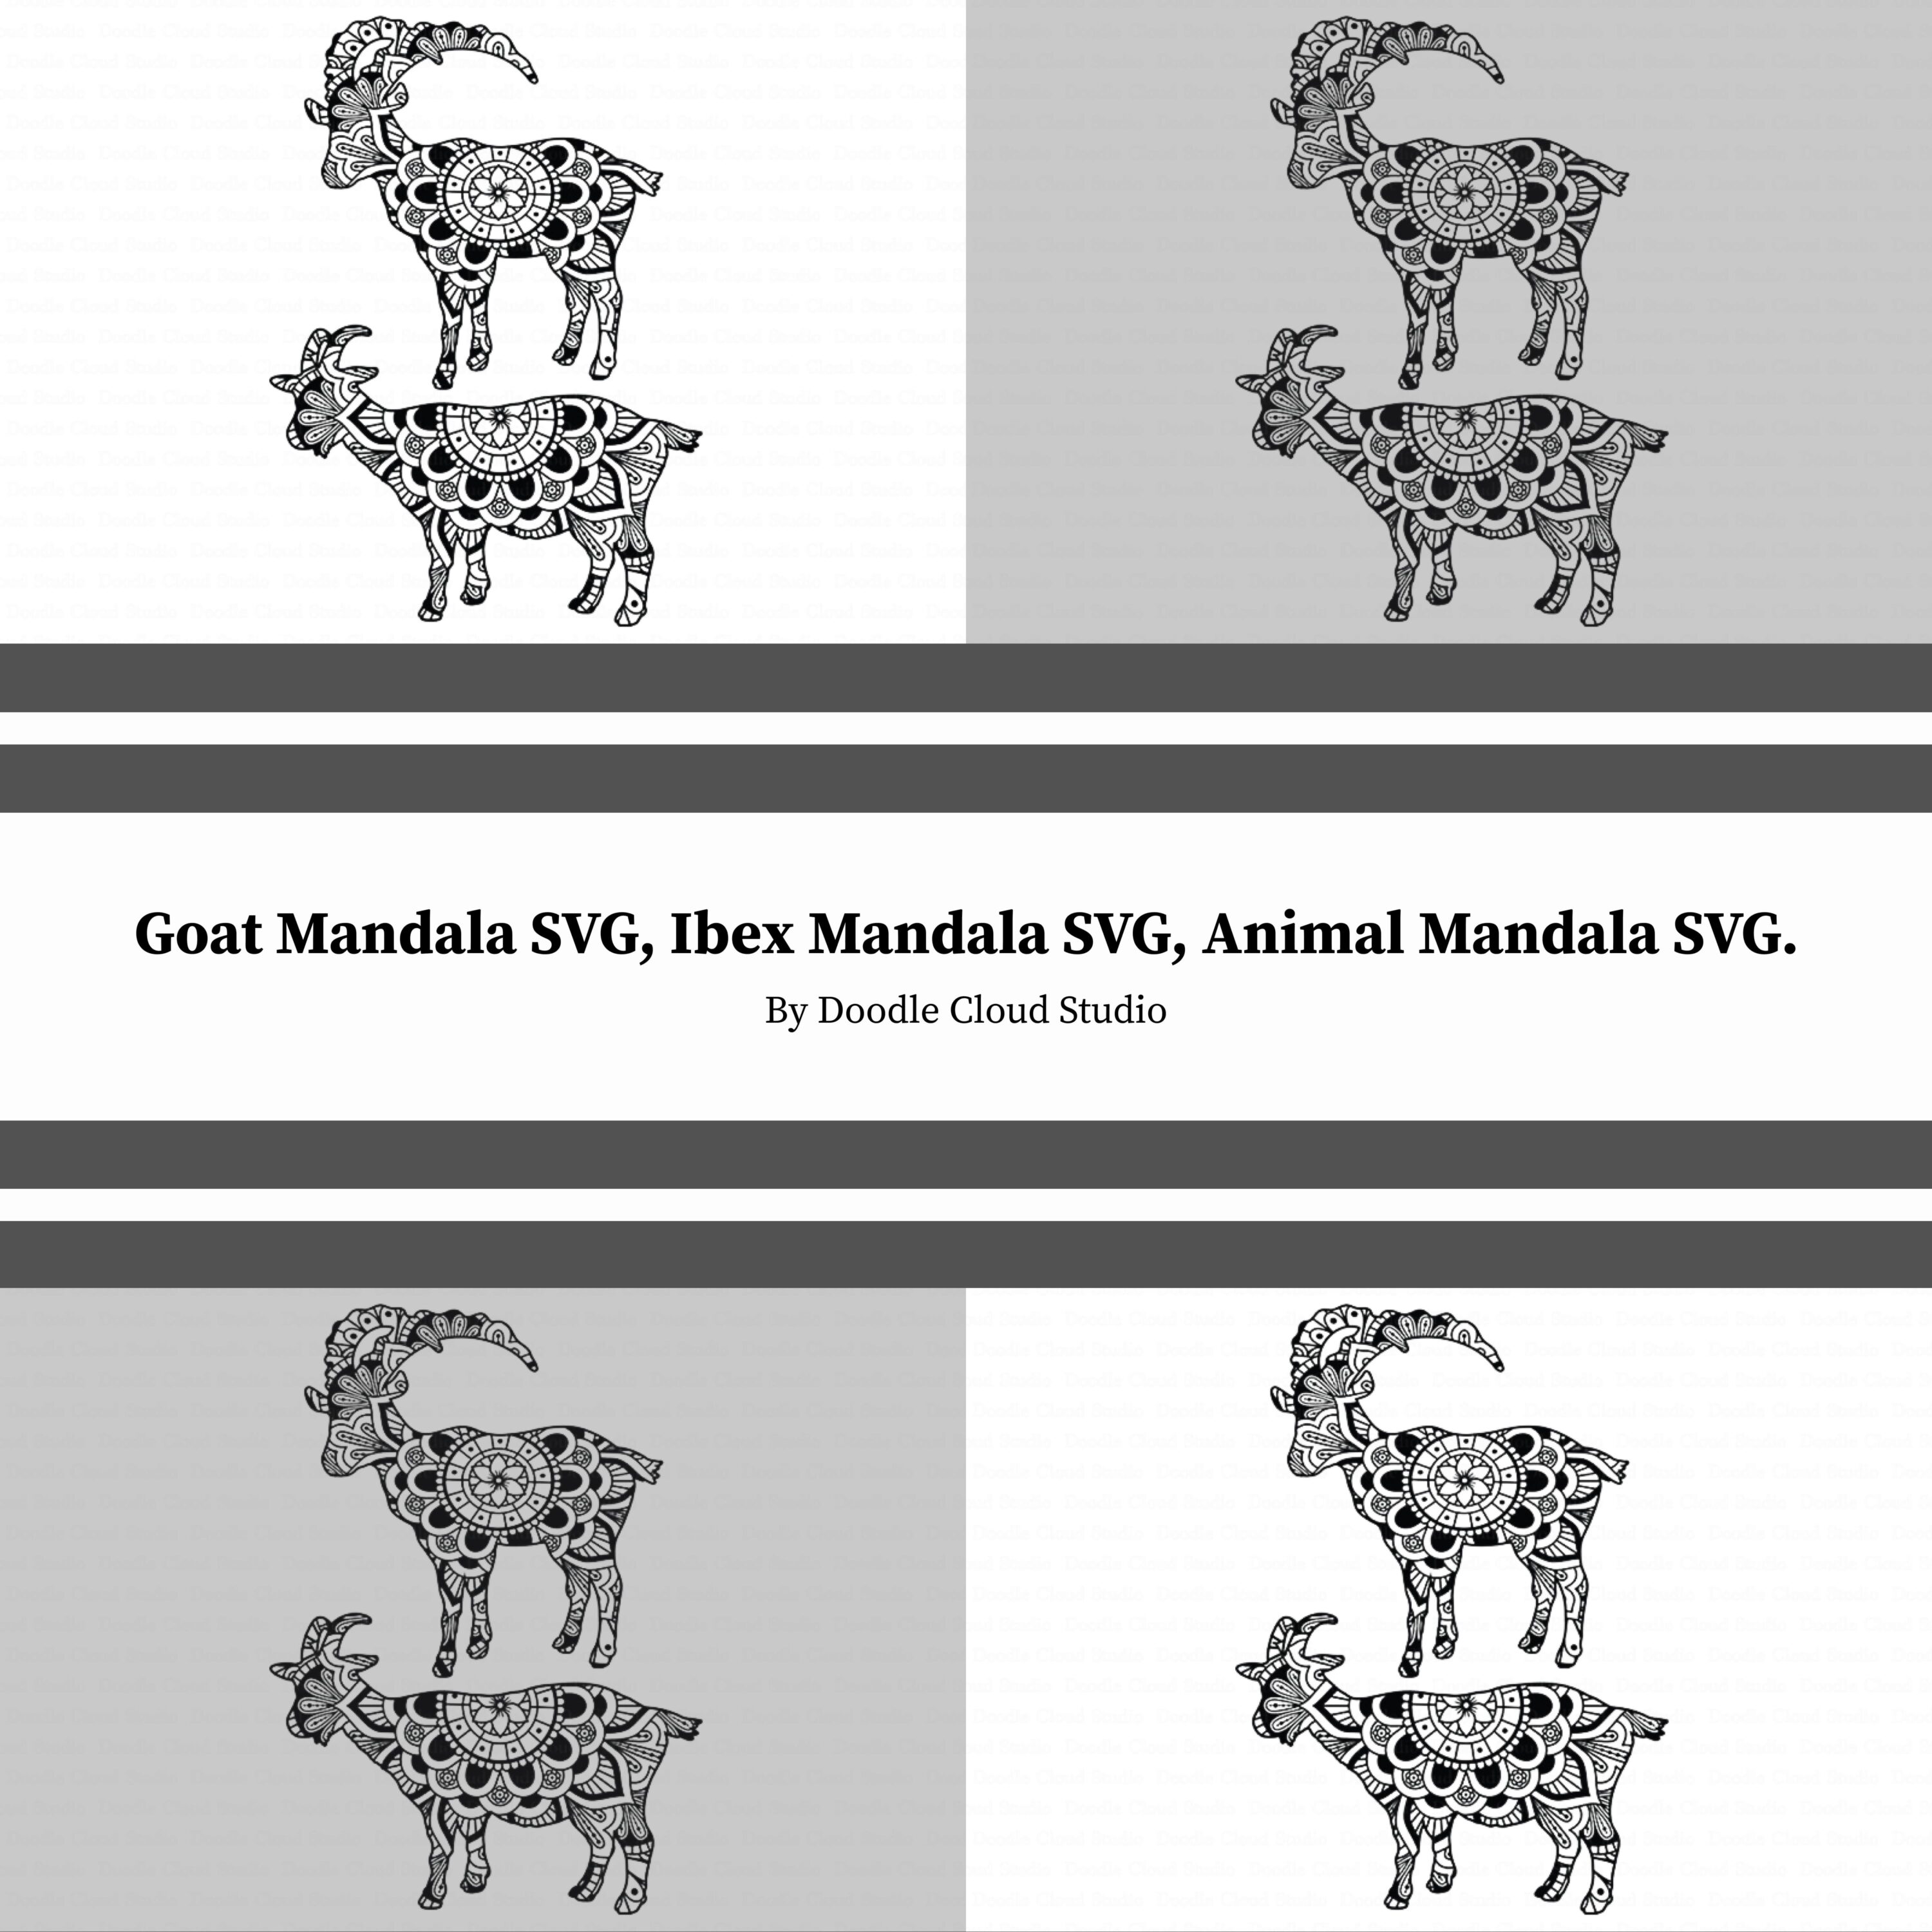 Three black and white images of animals on a gray background.